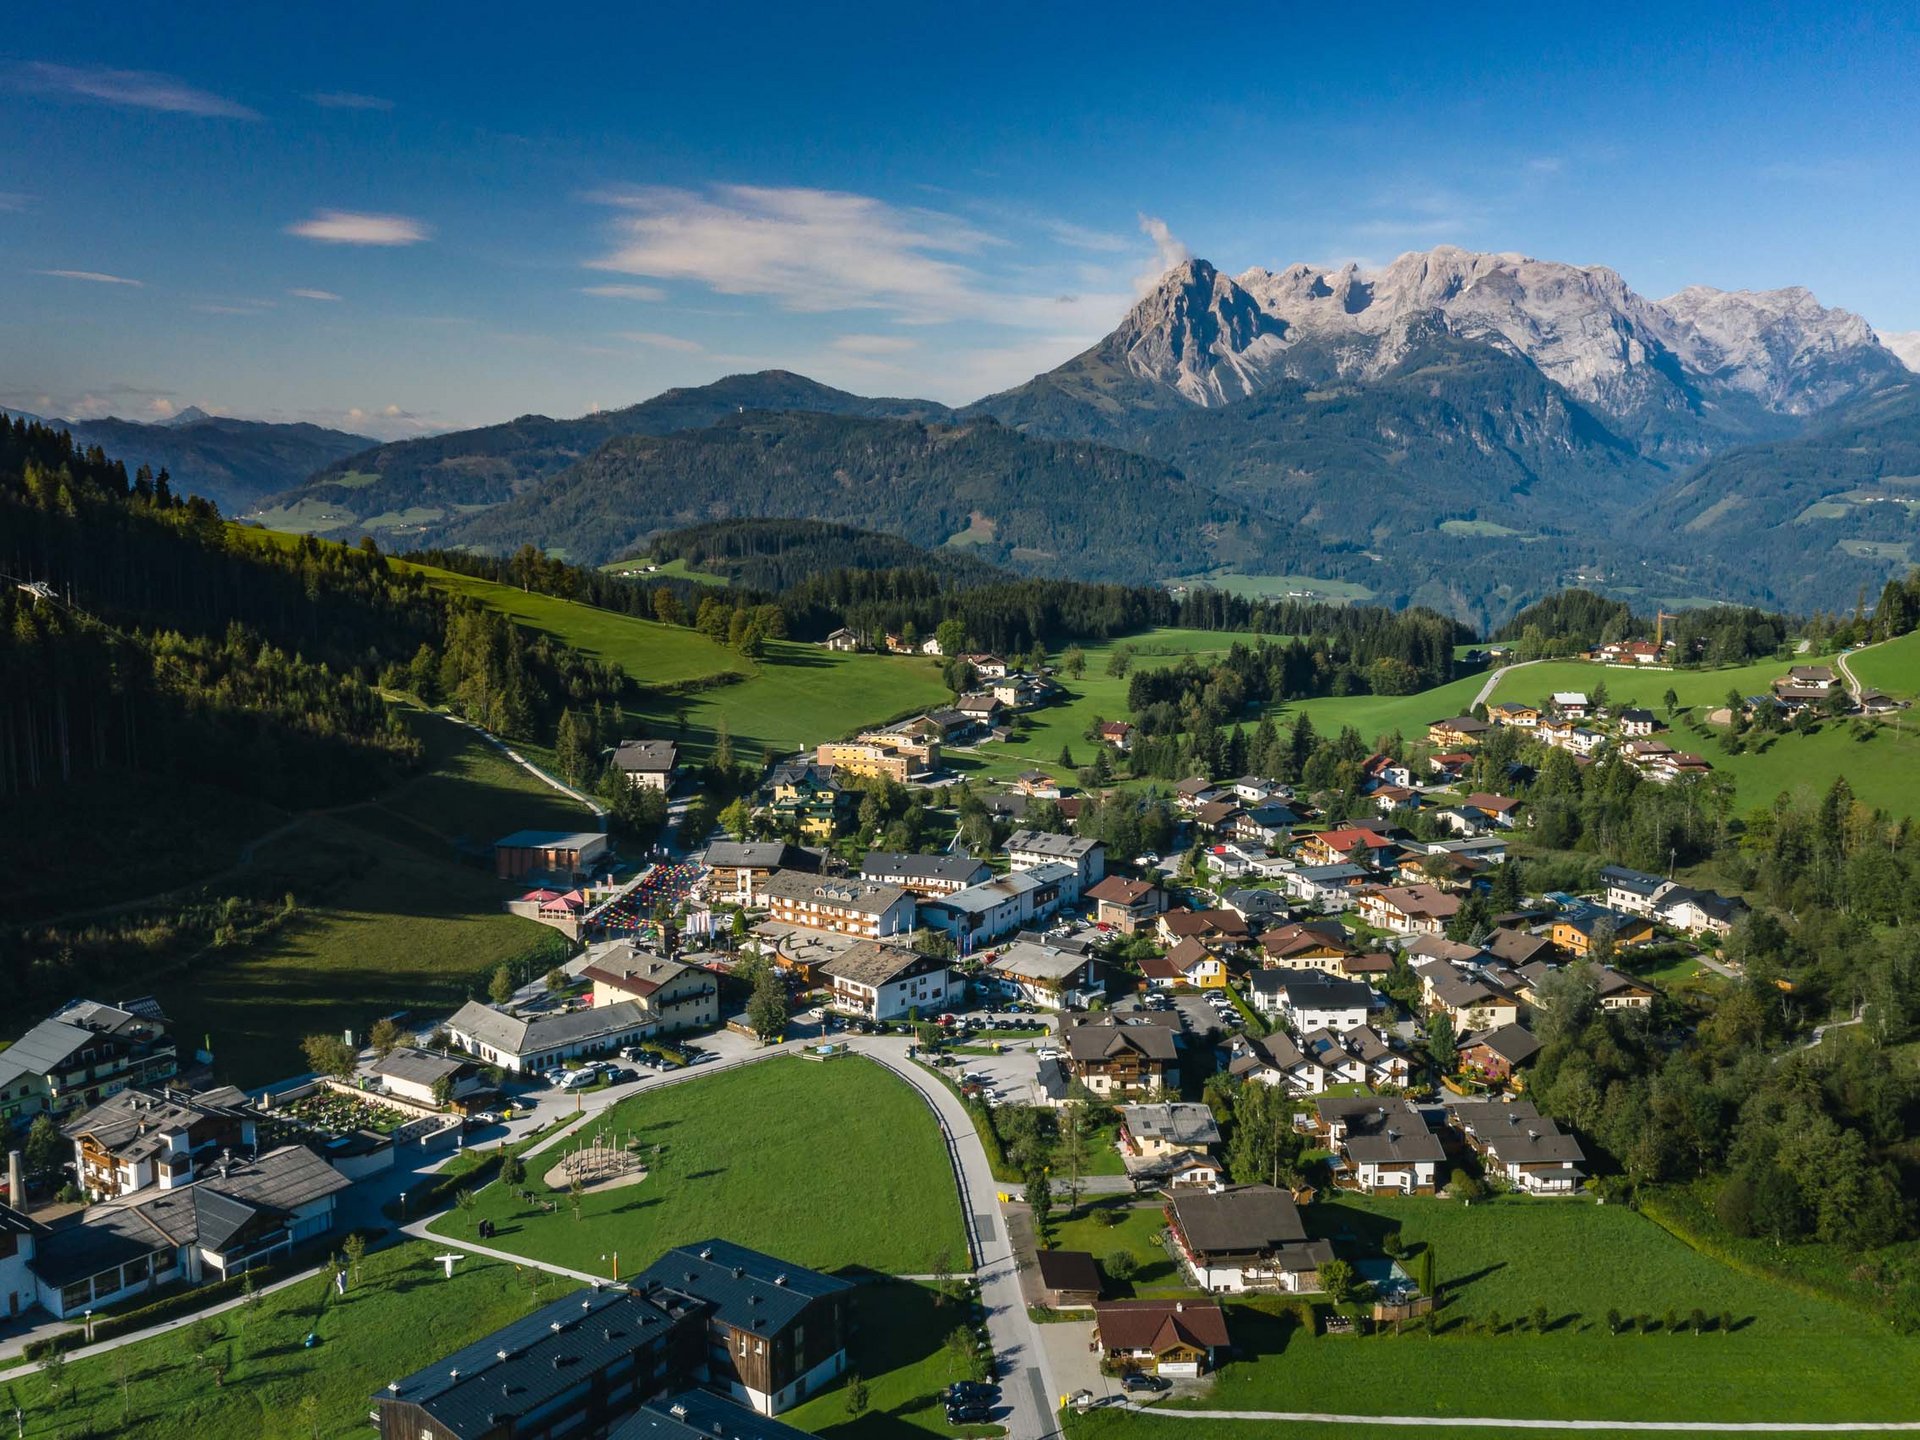 A holiday without your car in Austria